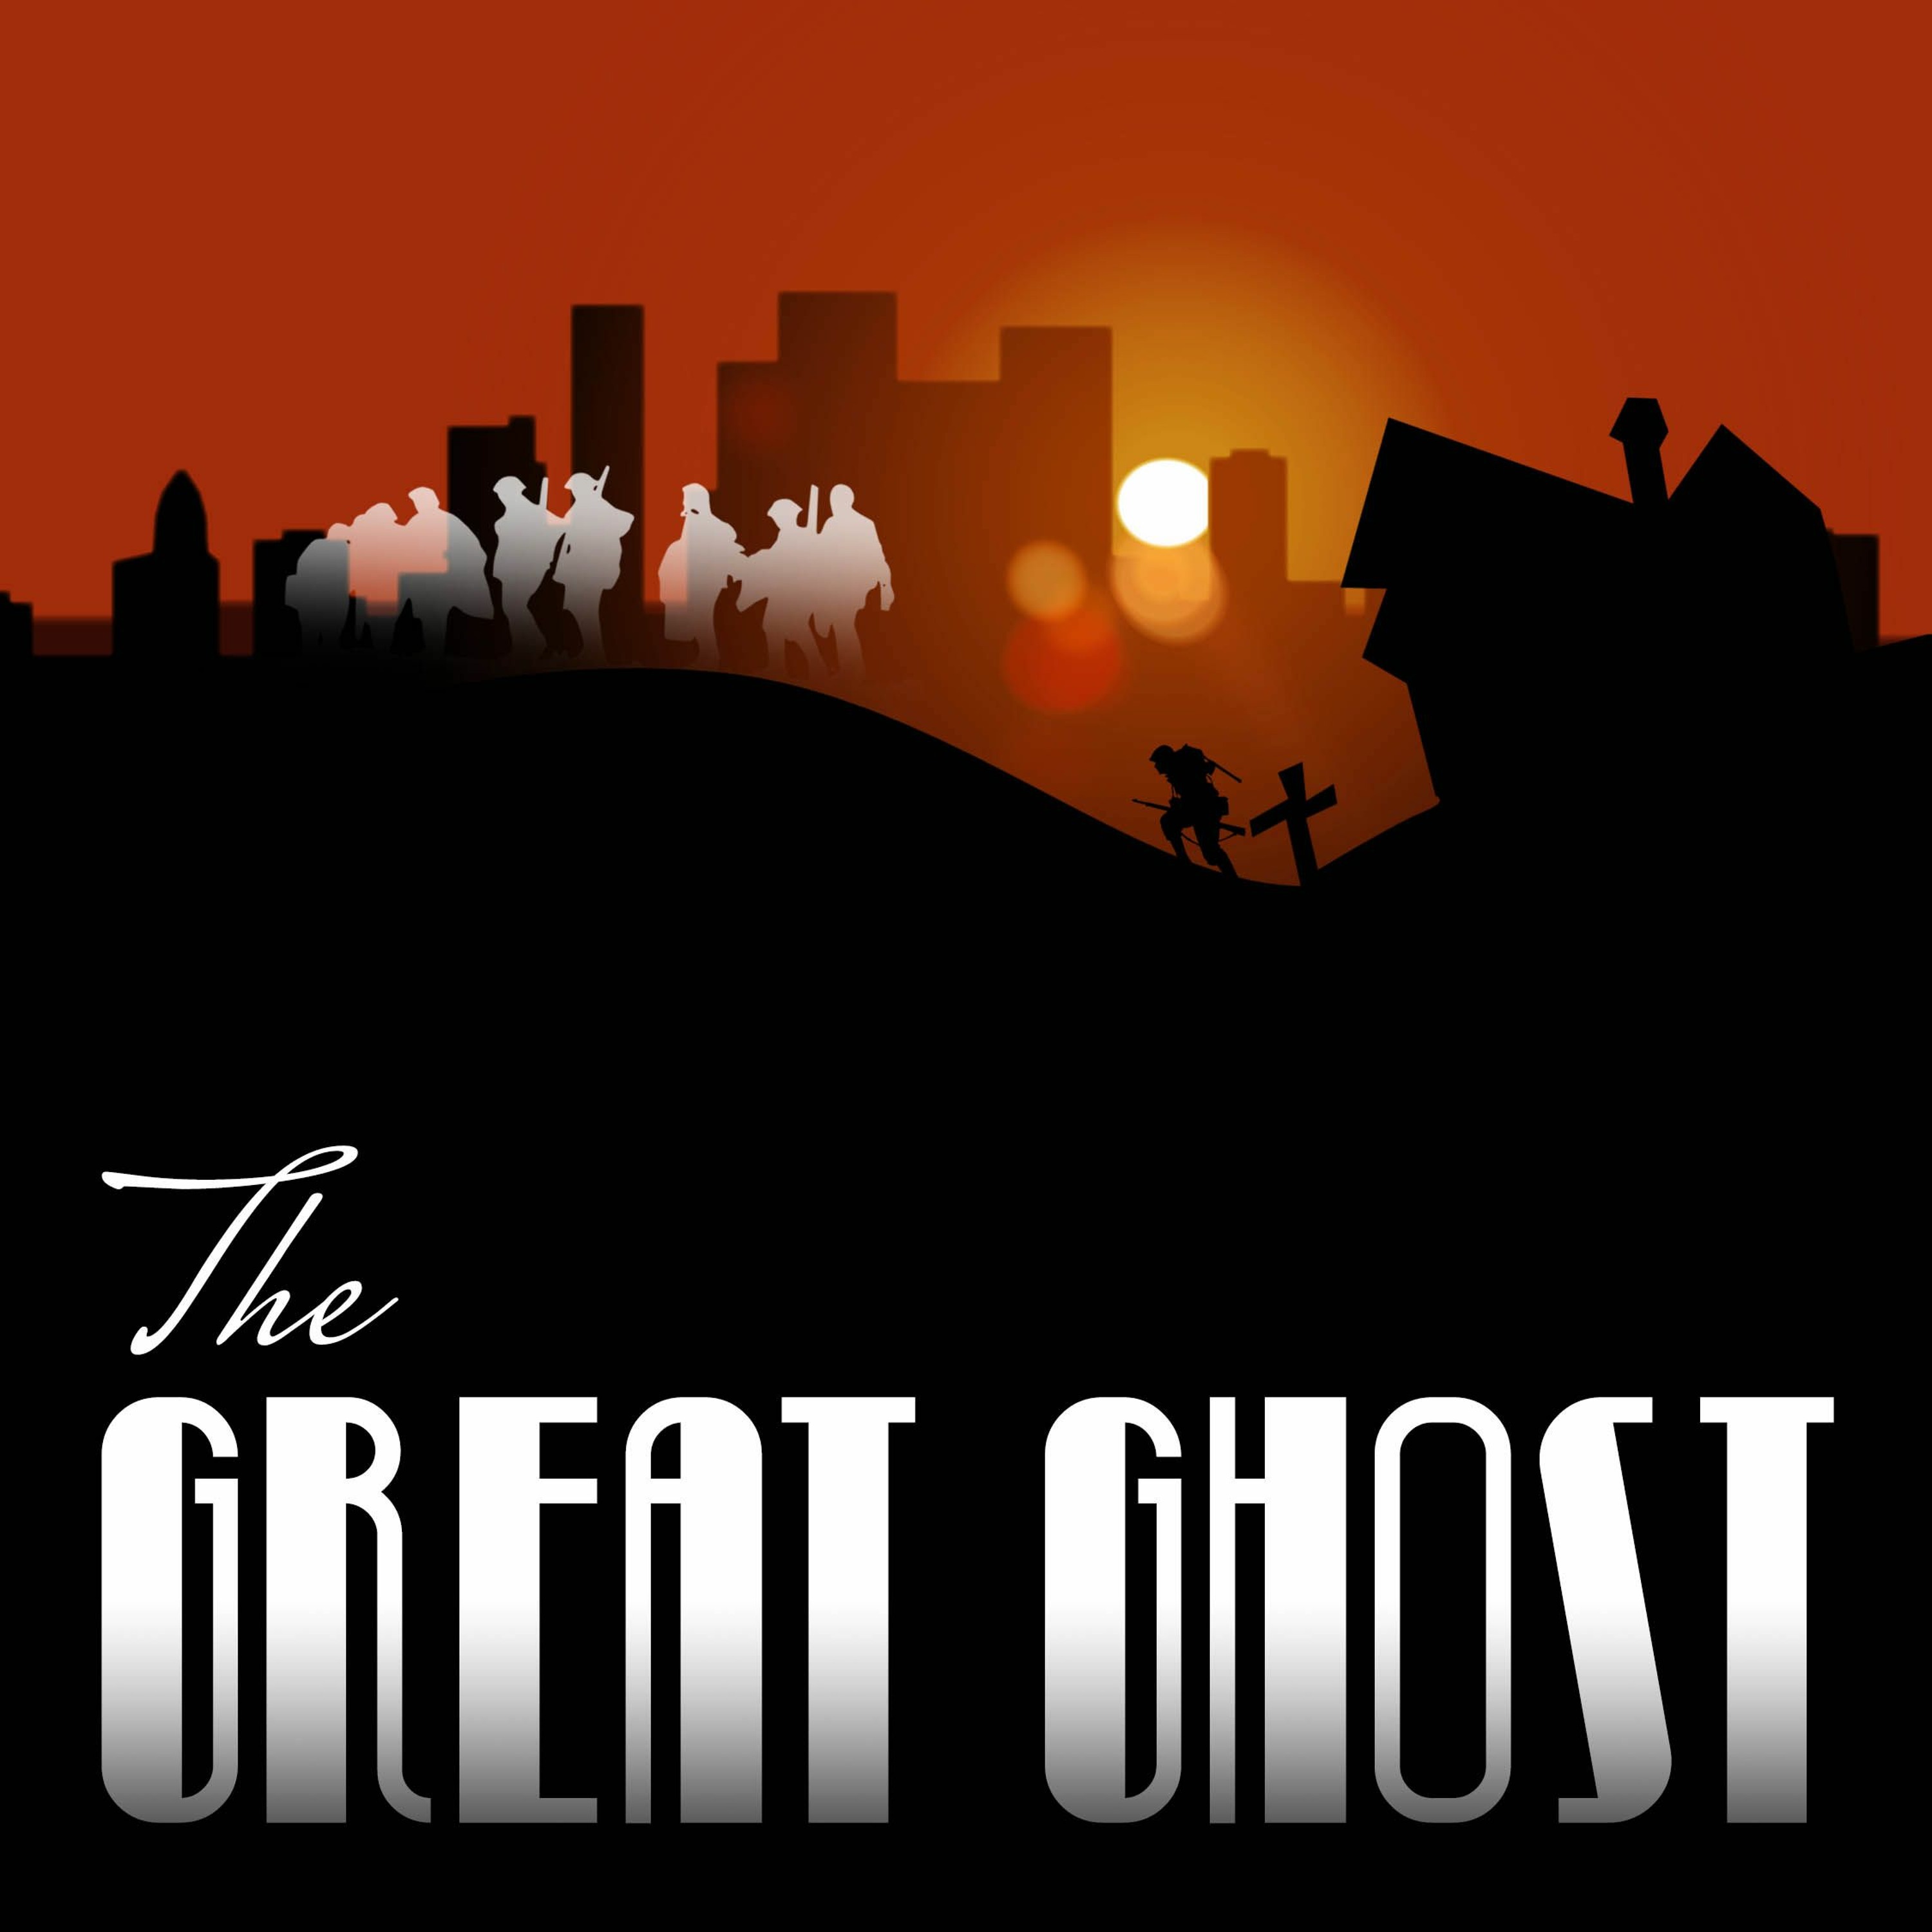 The Great Ghost - Episode 2: Horror in a Holy Place